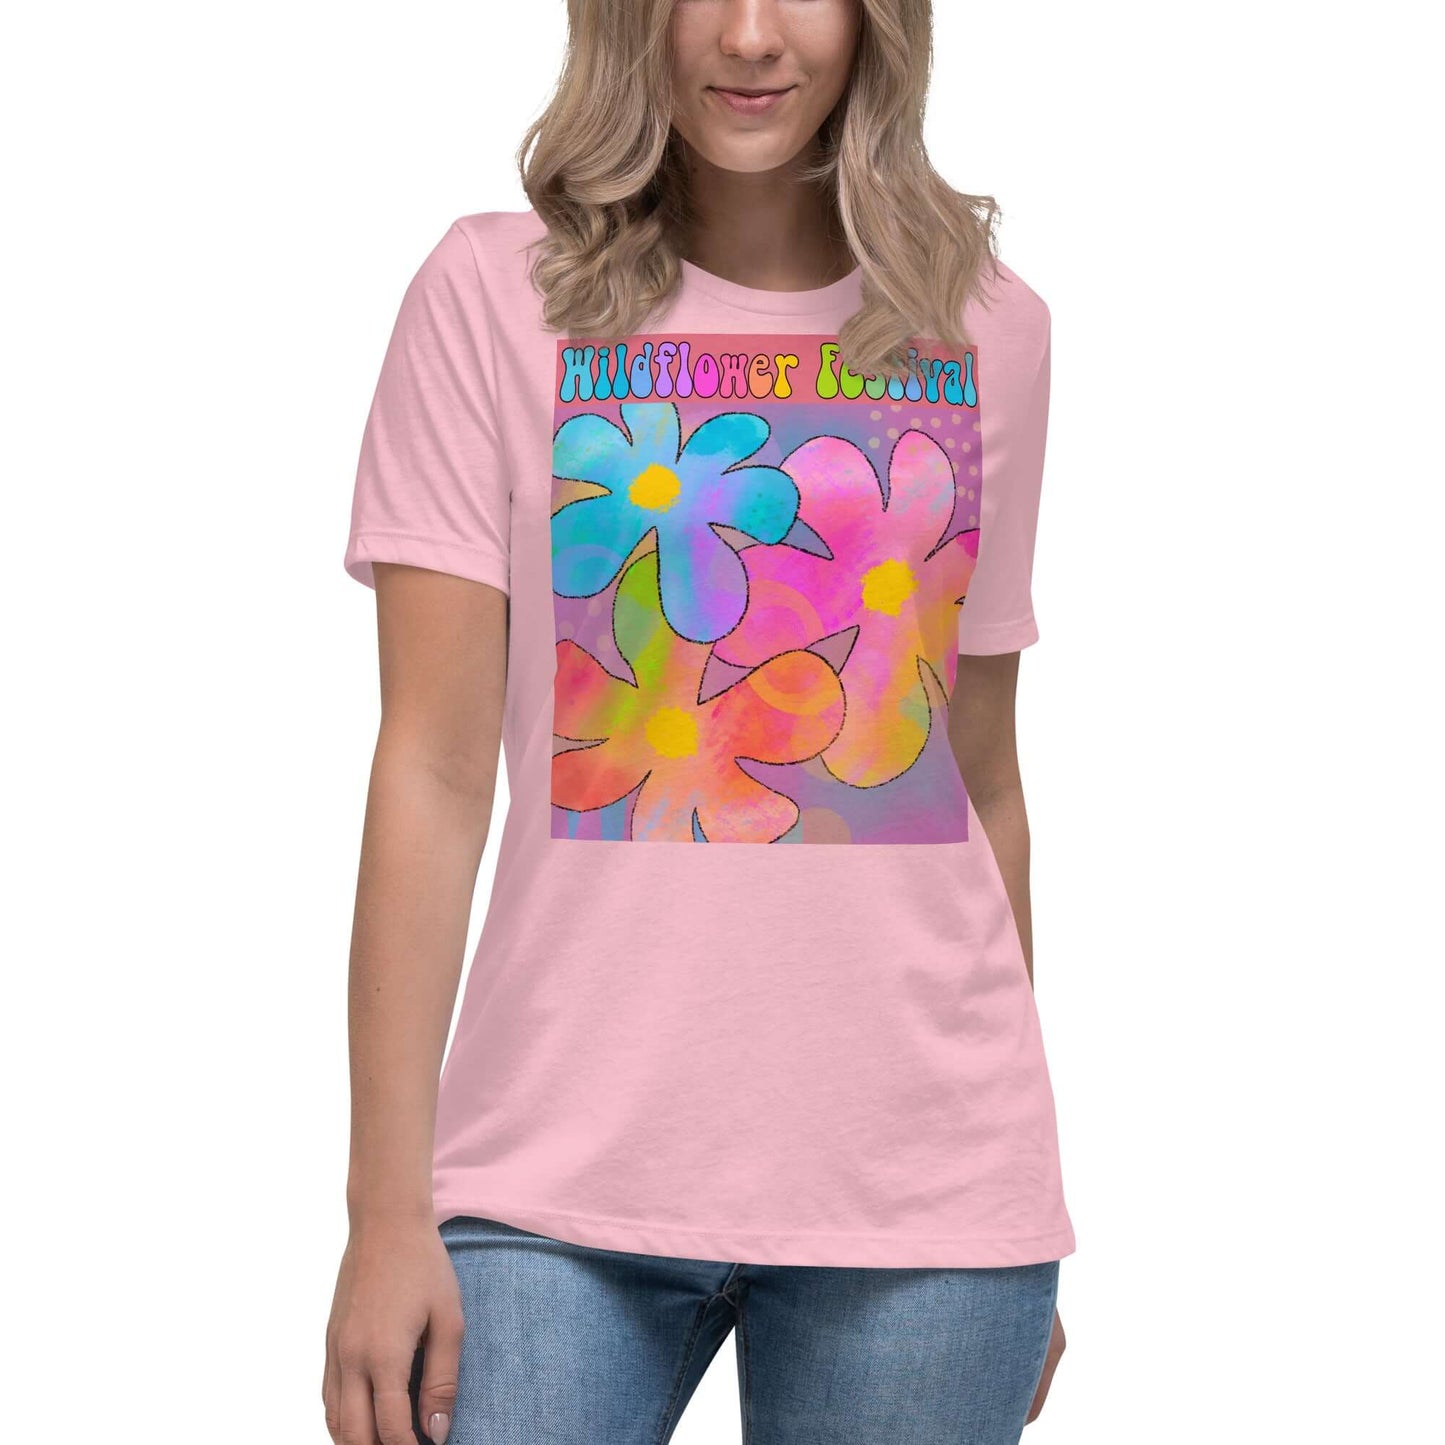 Big Colorful Hippie 1960s Psychedelic Flowers with Text “Wildflower Festival” Women’s Short Sleeve Tee in Light Pink